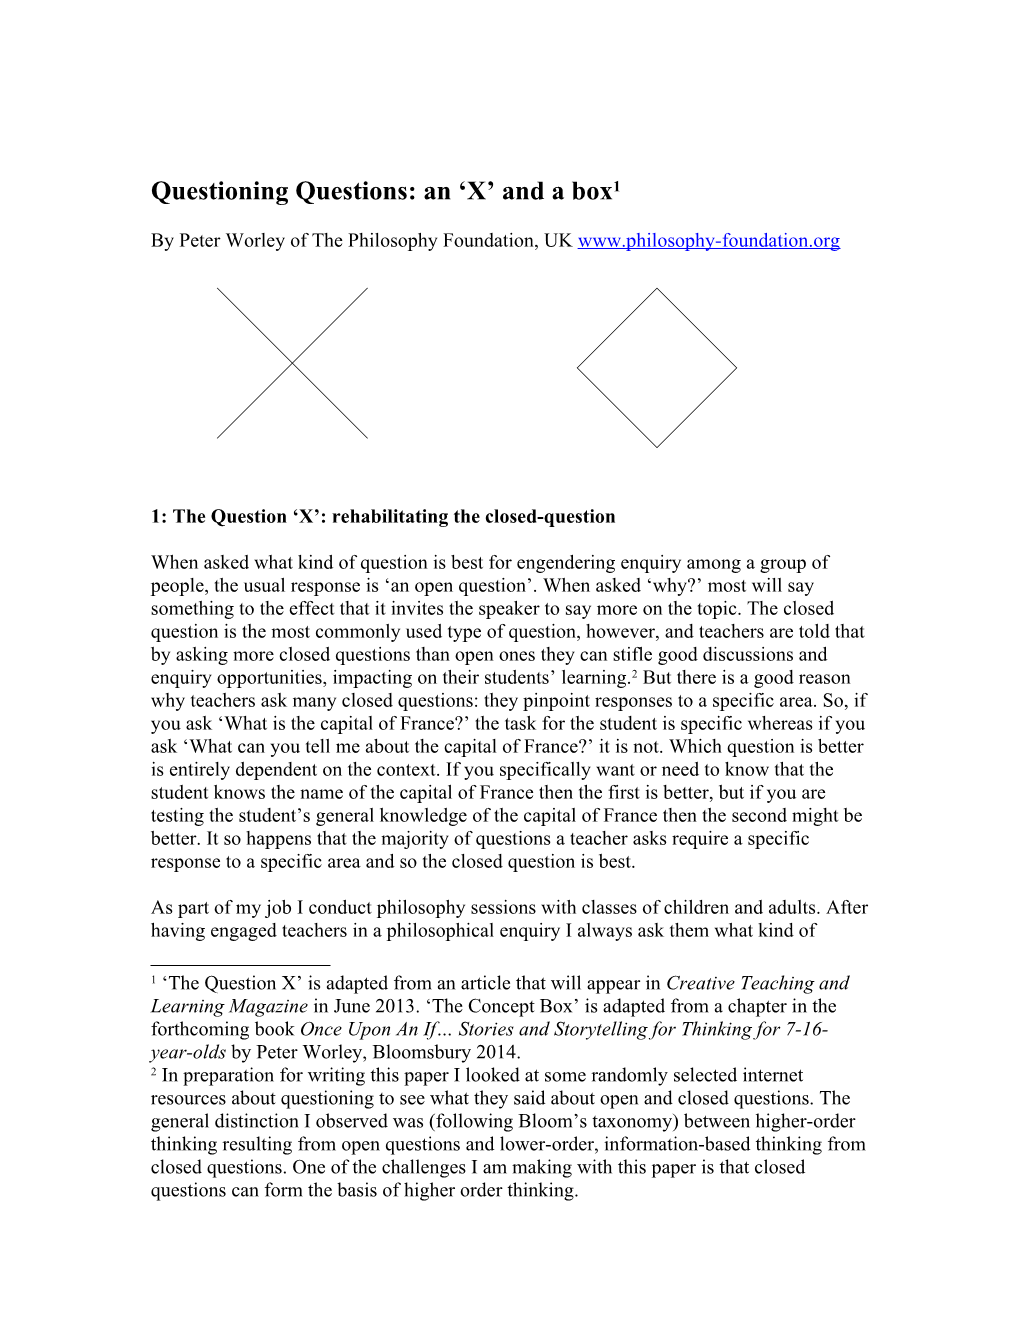 Questioning Questions: an X and a Box 1